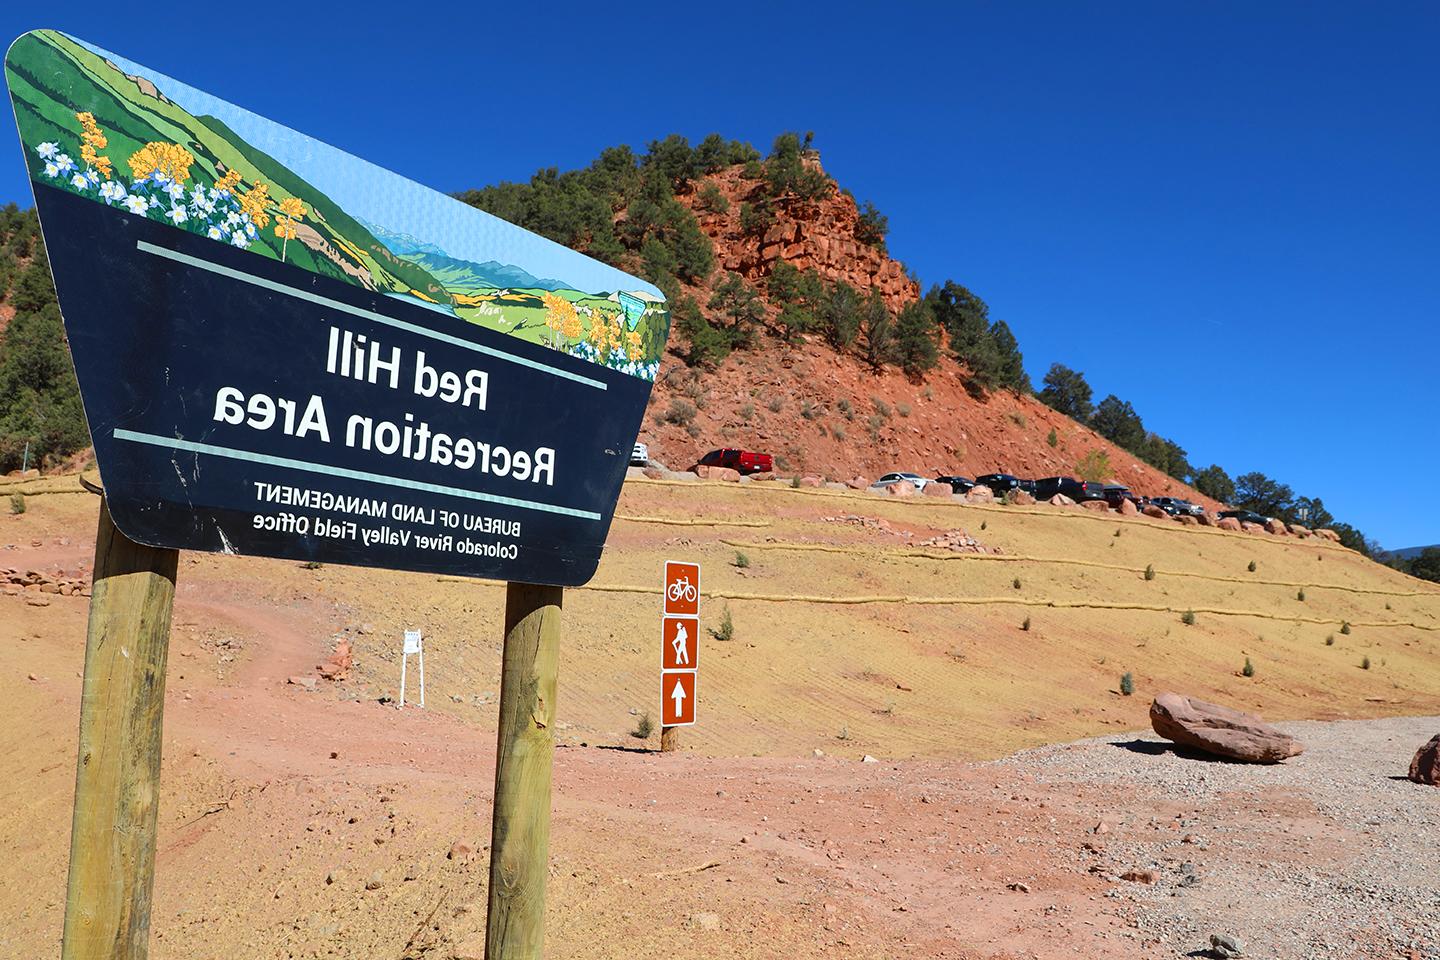 The sign for the Red Hill Recreation Area in Carbondale, Colorado.